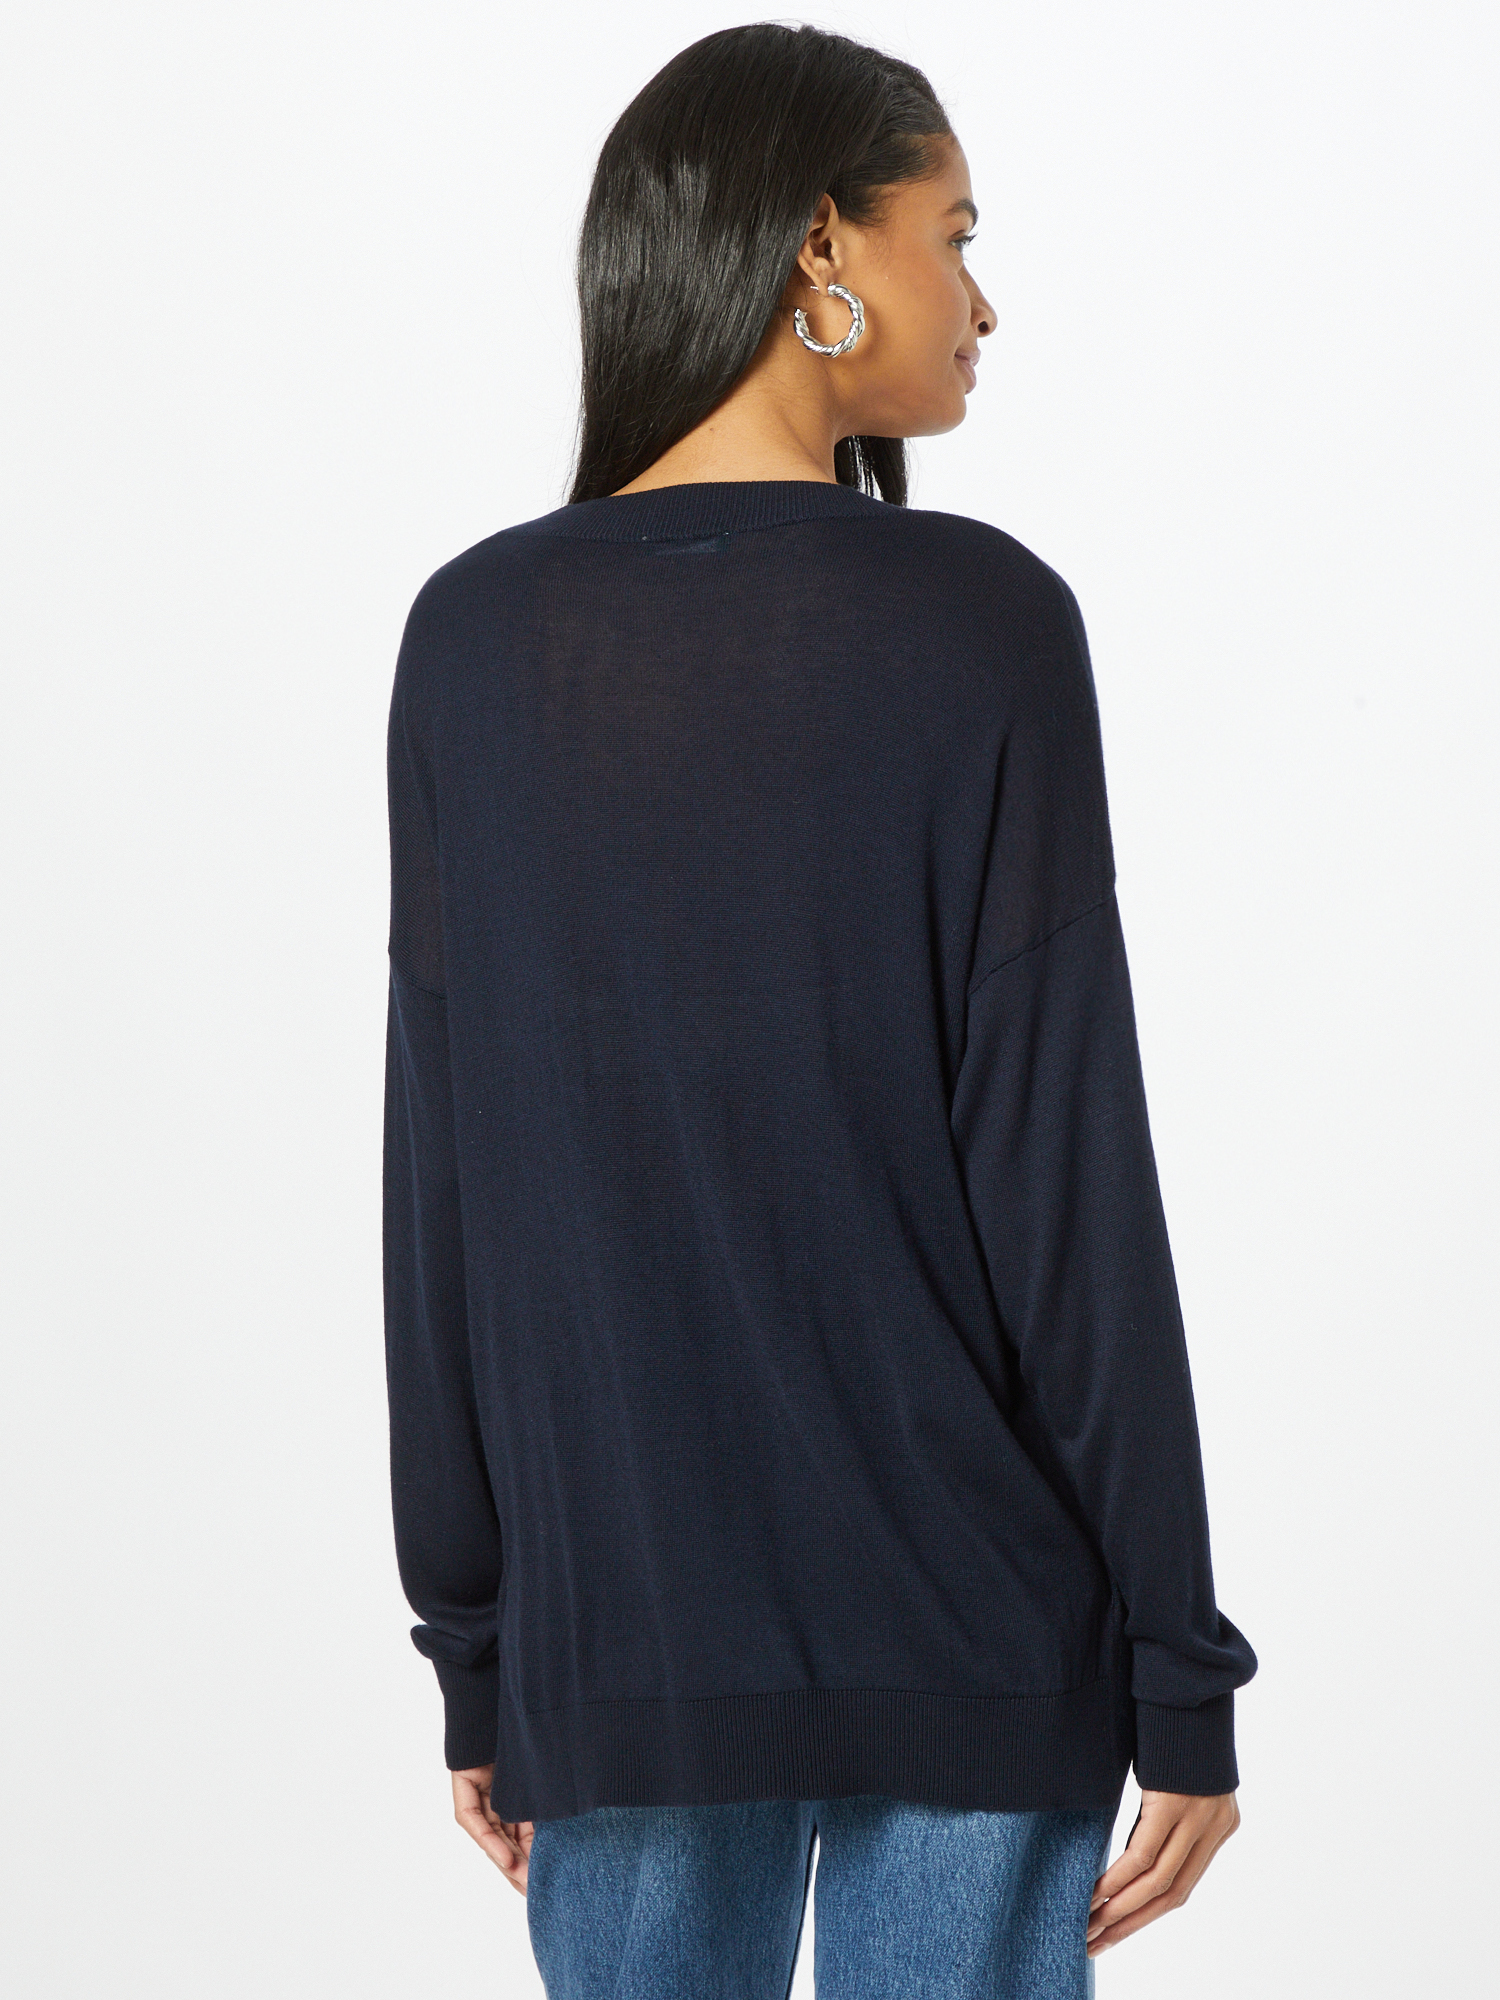 UNITED COLORS OF BENETTON Pullover in Navy 